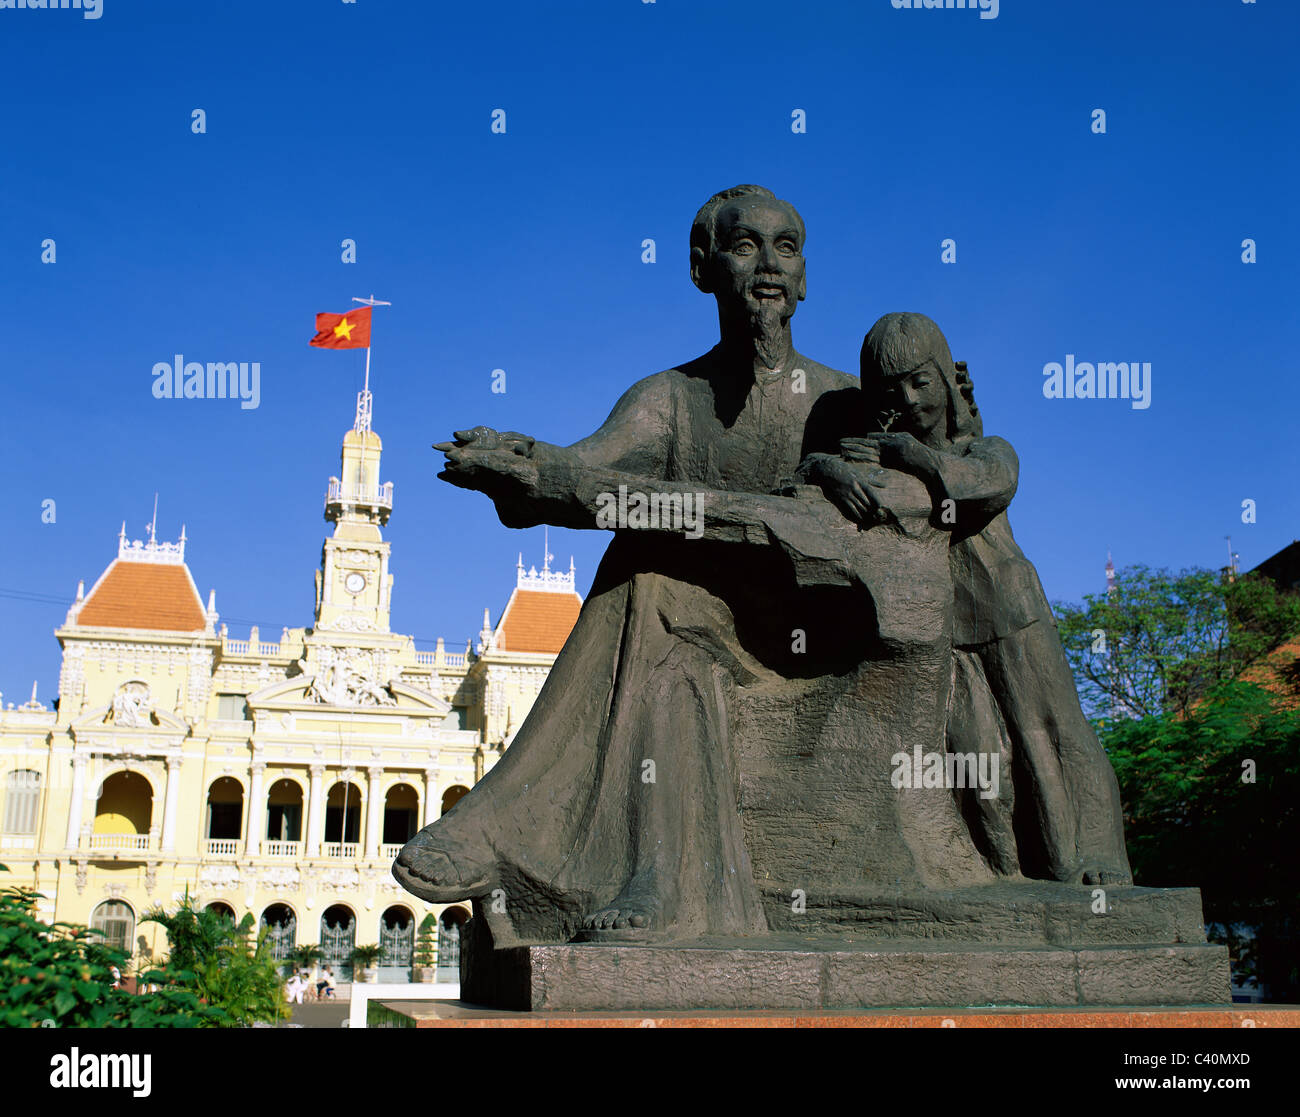 Asia, Building, City, Committee, Communism, Flag, Ho chi minh, Holiday, Landmark, People, Statue, Tourism, Towers, Travel, Vacat Stock Photo